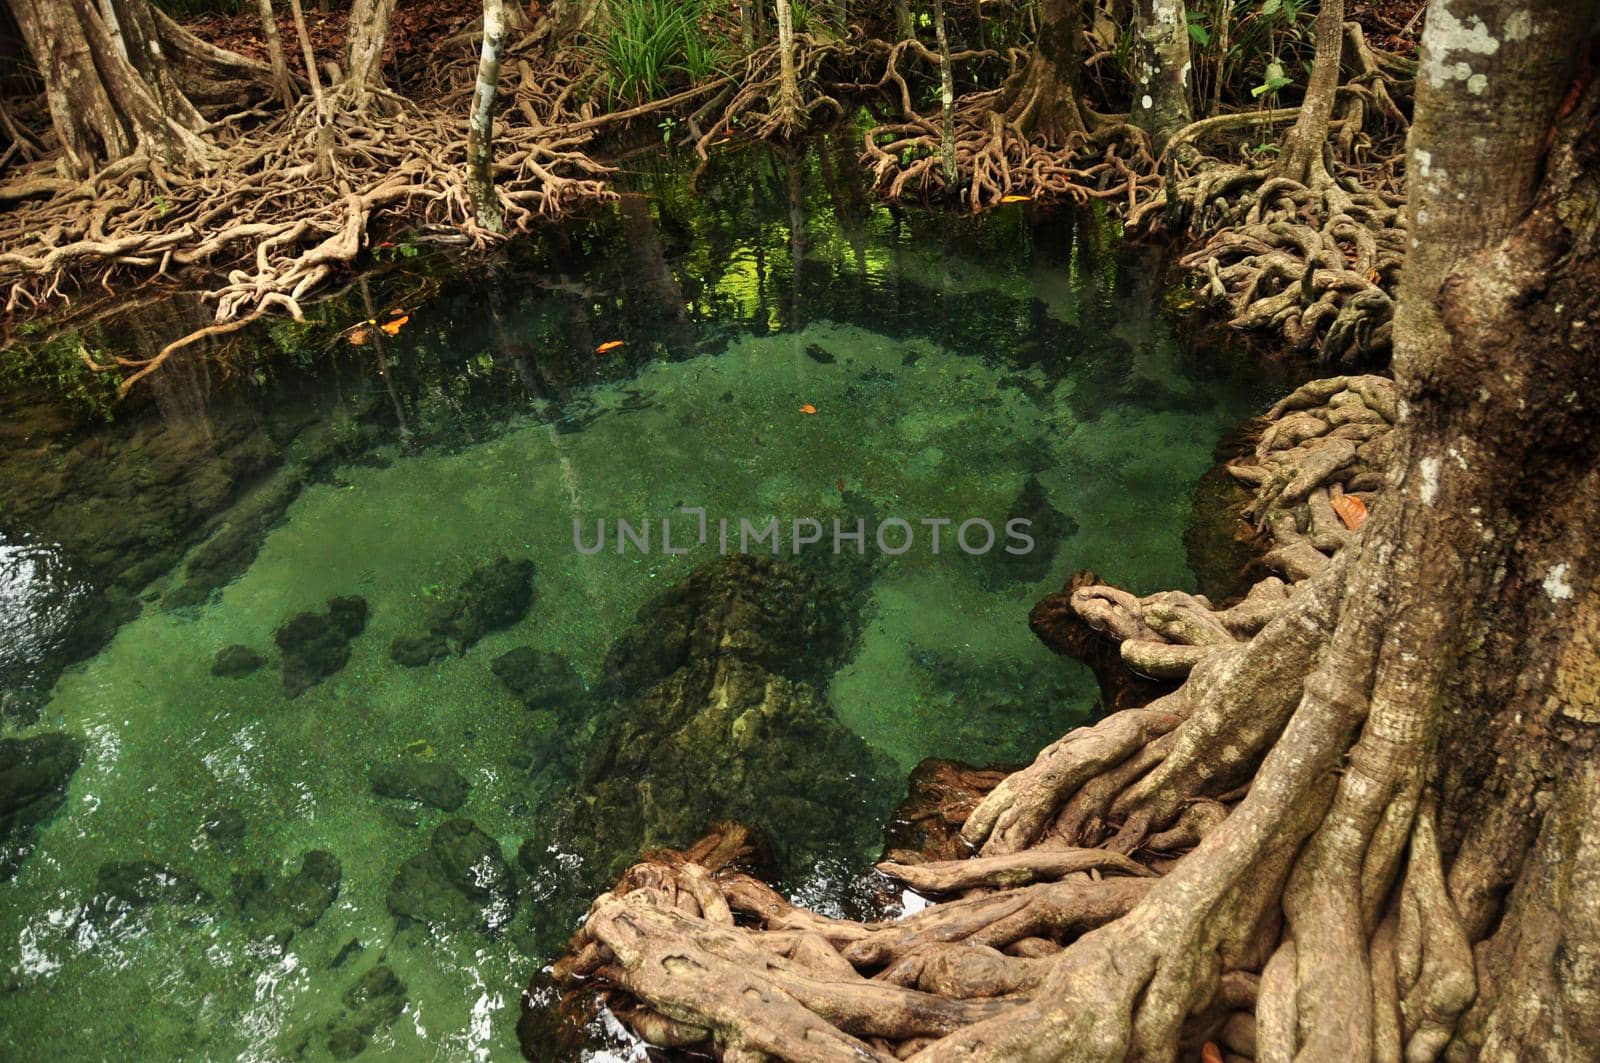 Transparent water in wild tropical pond or river, From above shot of clear water in small lake with mangrove trees roots around